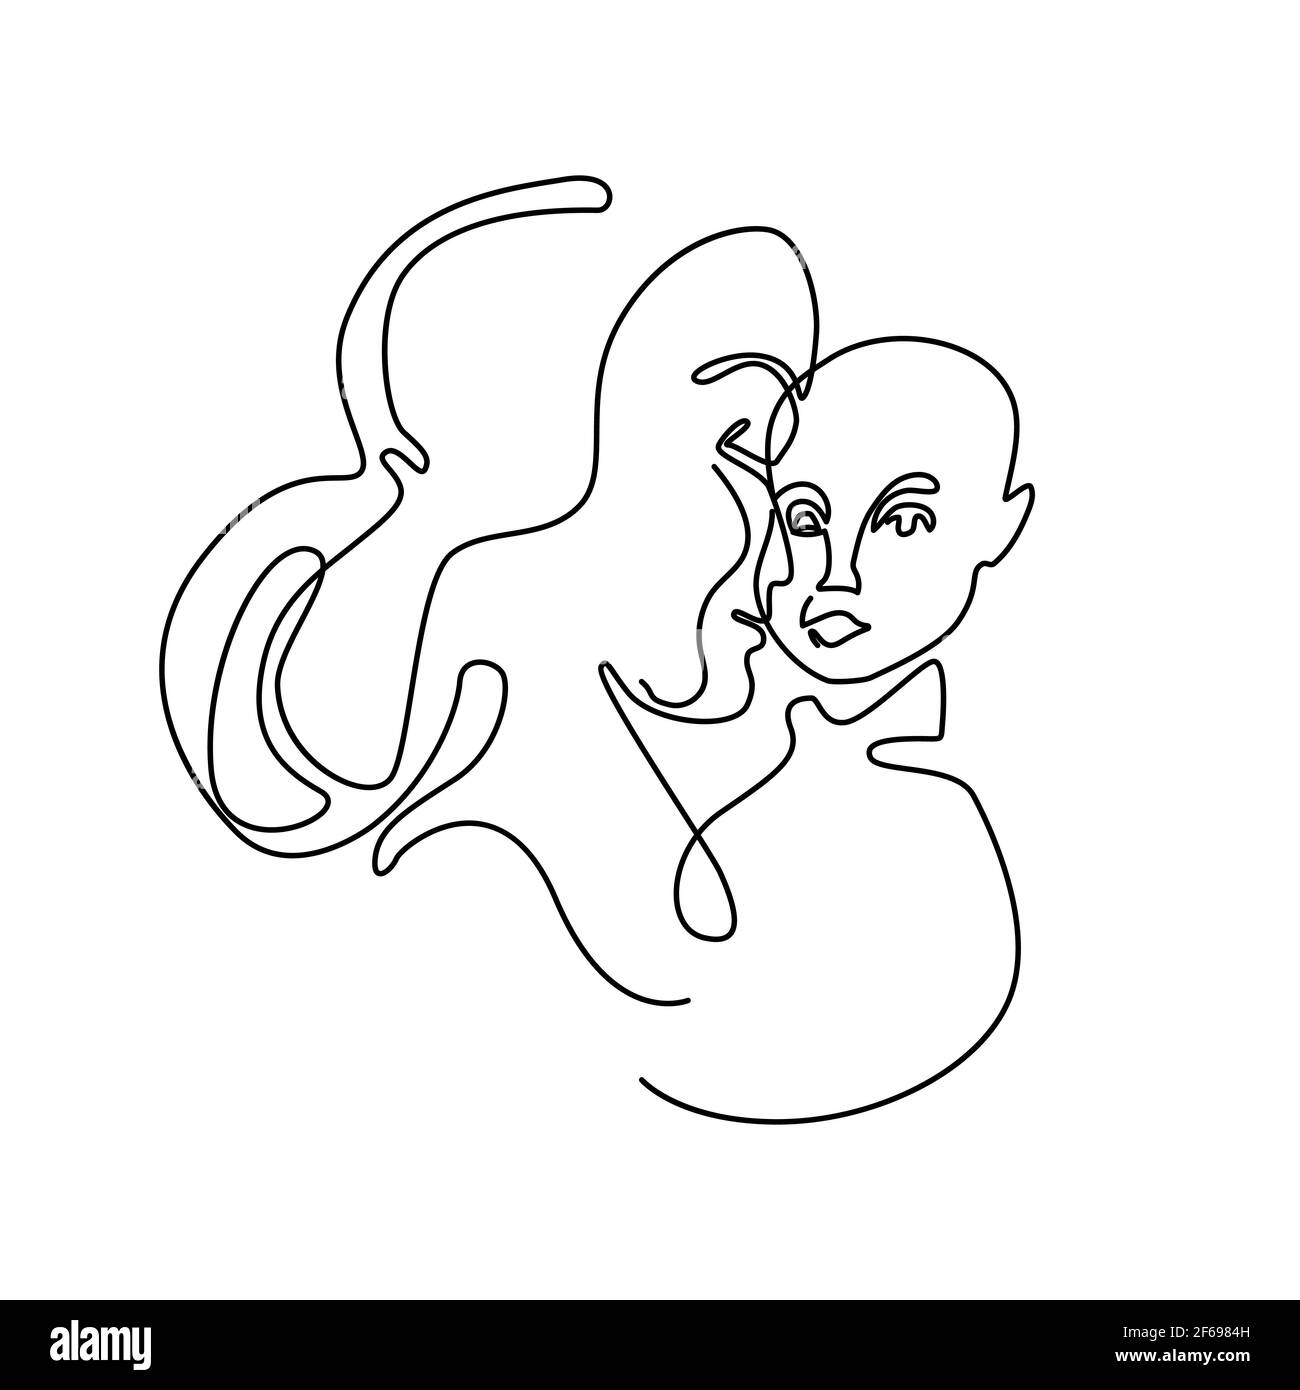 Family abstract portrait of a mother holding an infant. Simple line art vector illustration Stock Vector